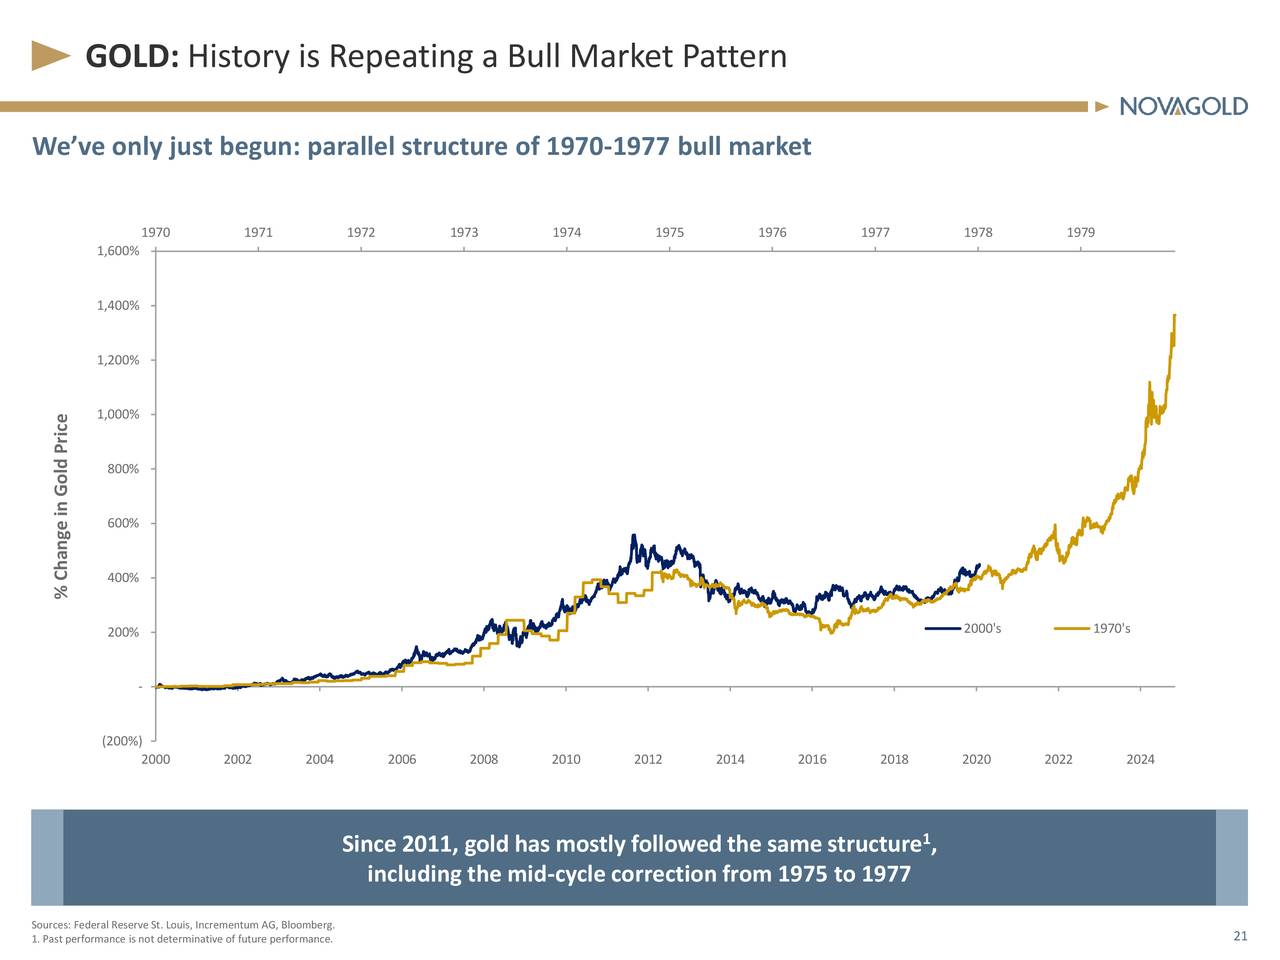 GOLD: History is Repeating a Bull Market Pattern